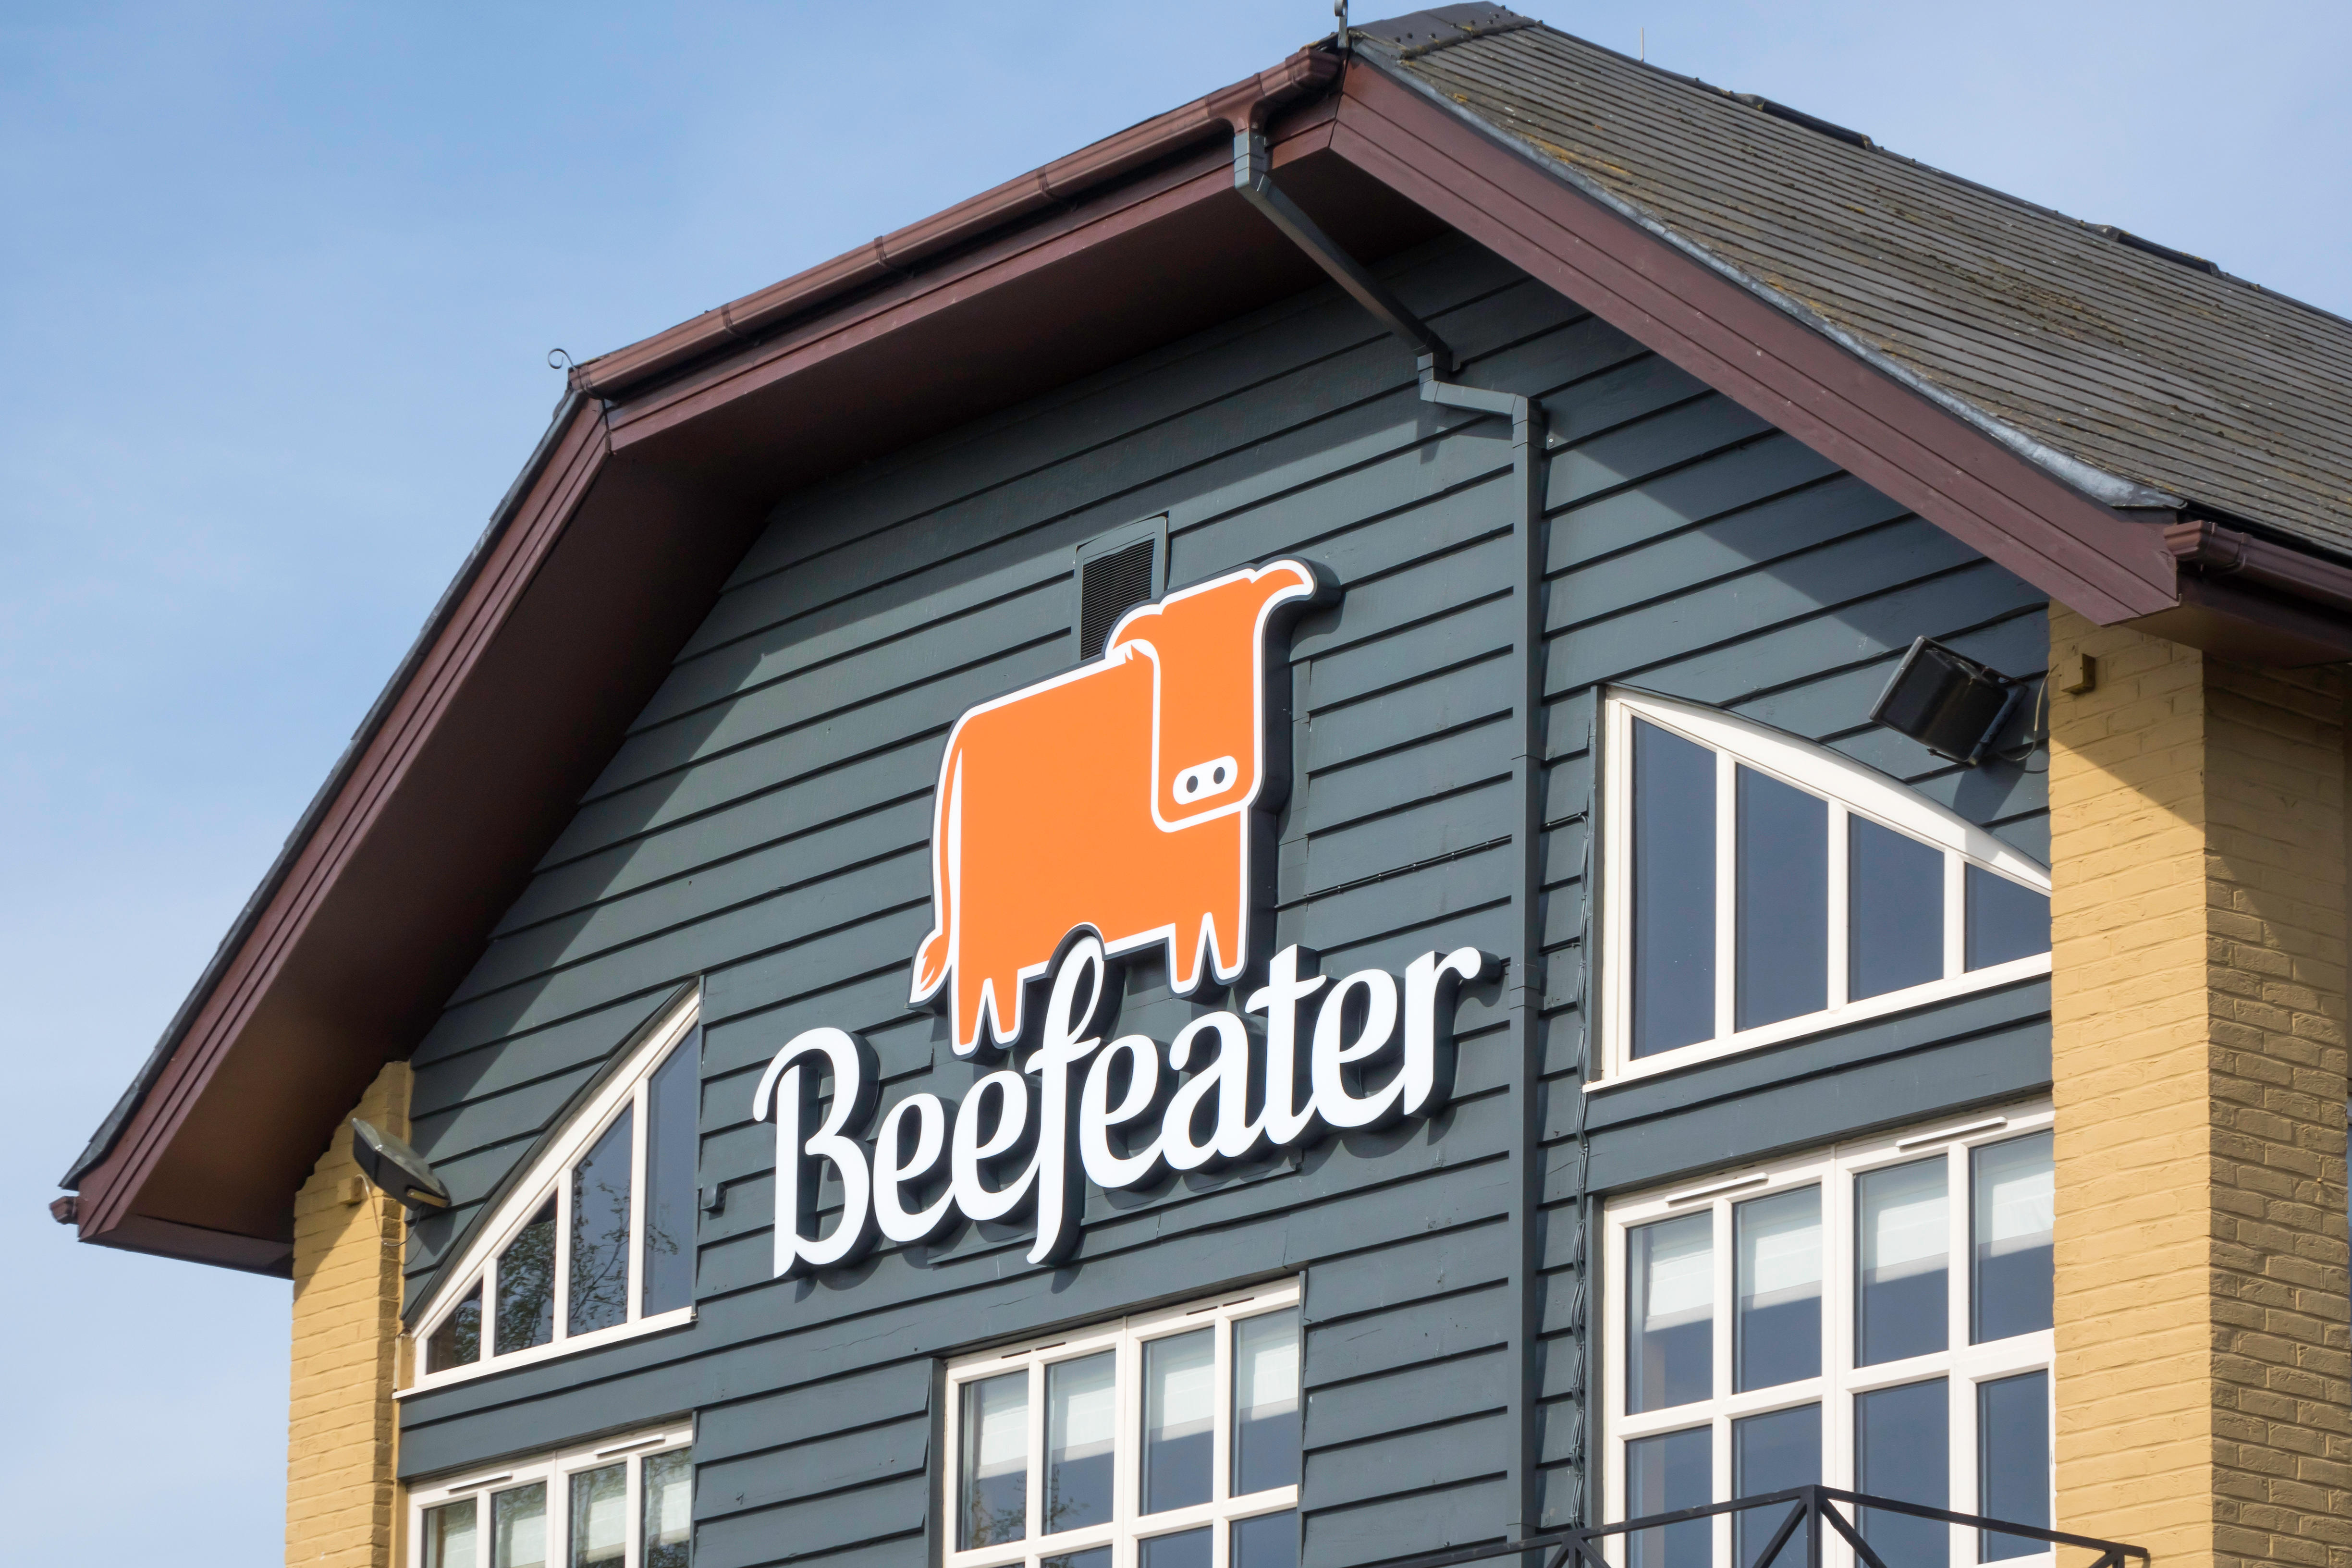 Whitbread has closed a Premier Inn and Beefeater venue leaving punters gutted